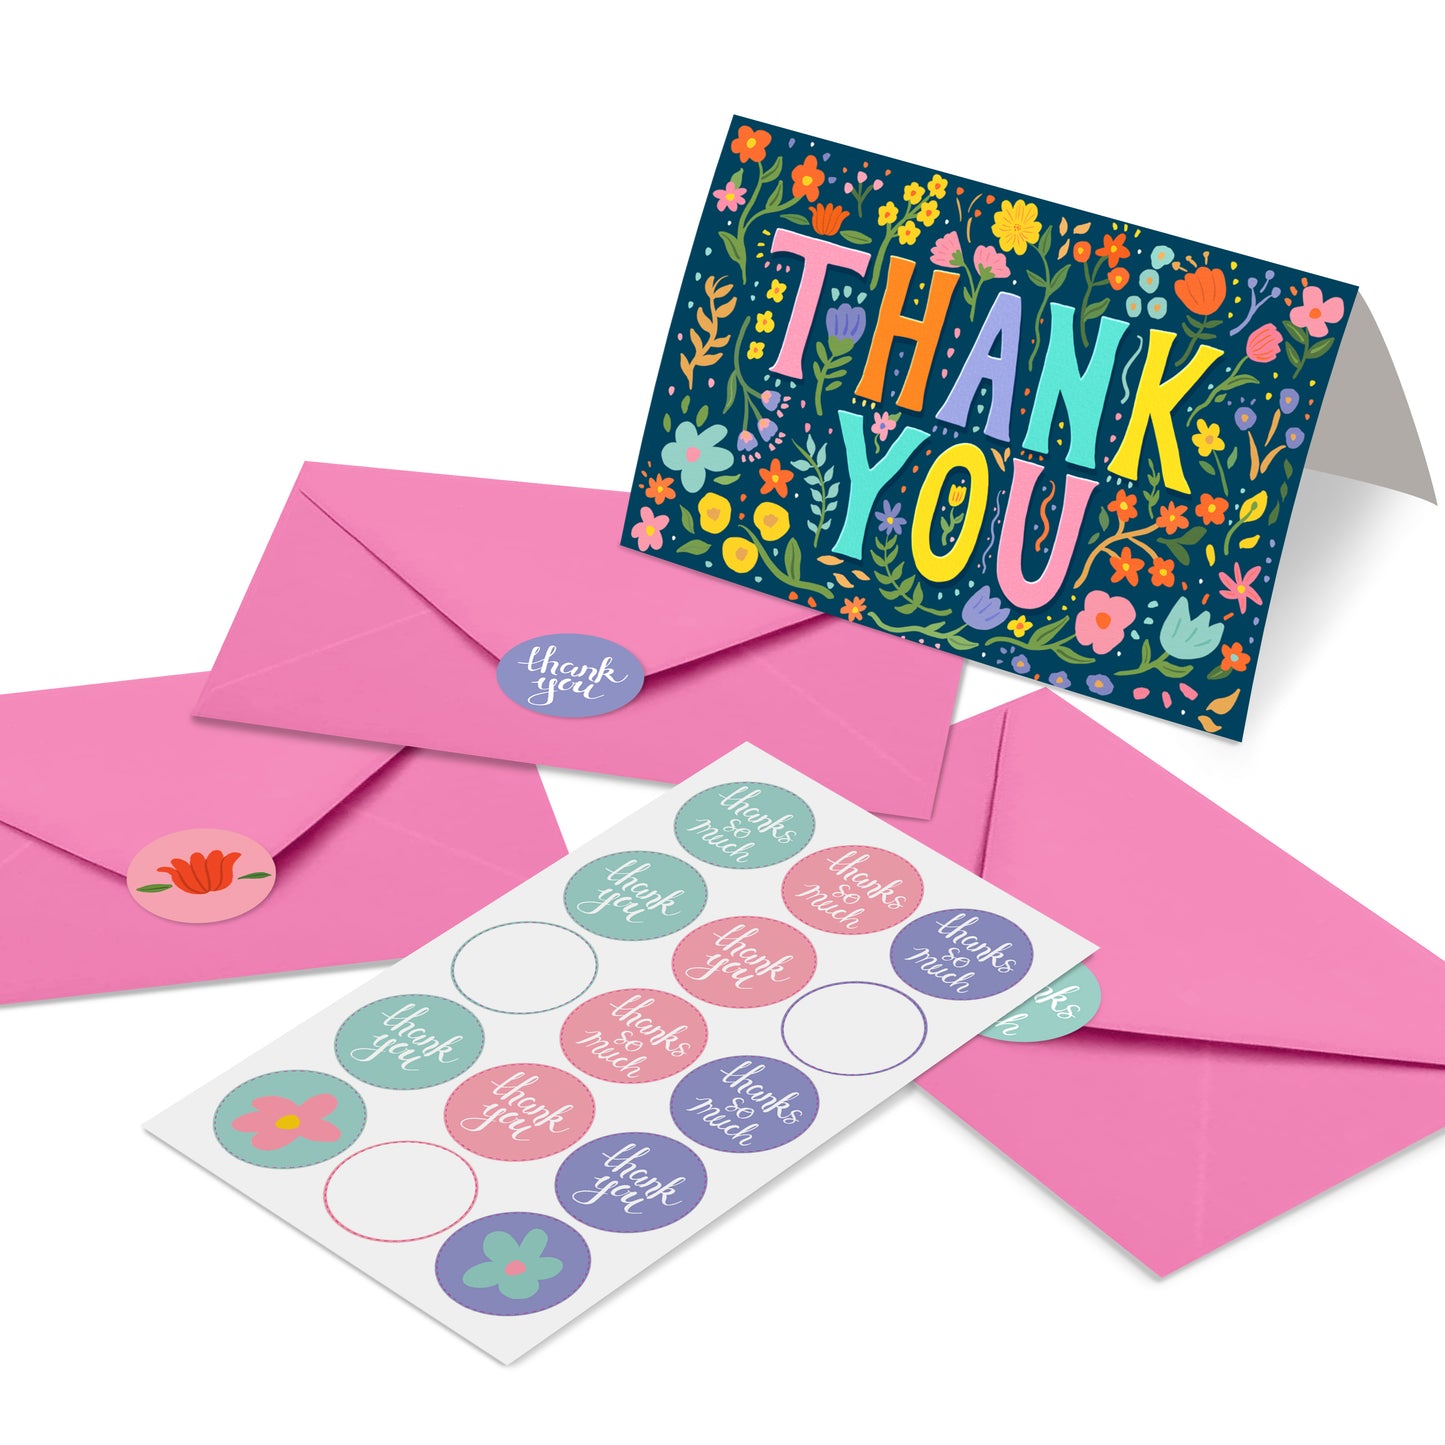 Embossed Thank You Cards Multipack - Floral Thank You Cards - Pack of 24 Cards